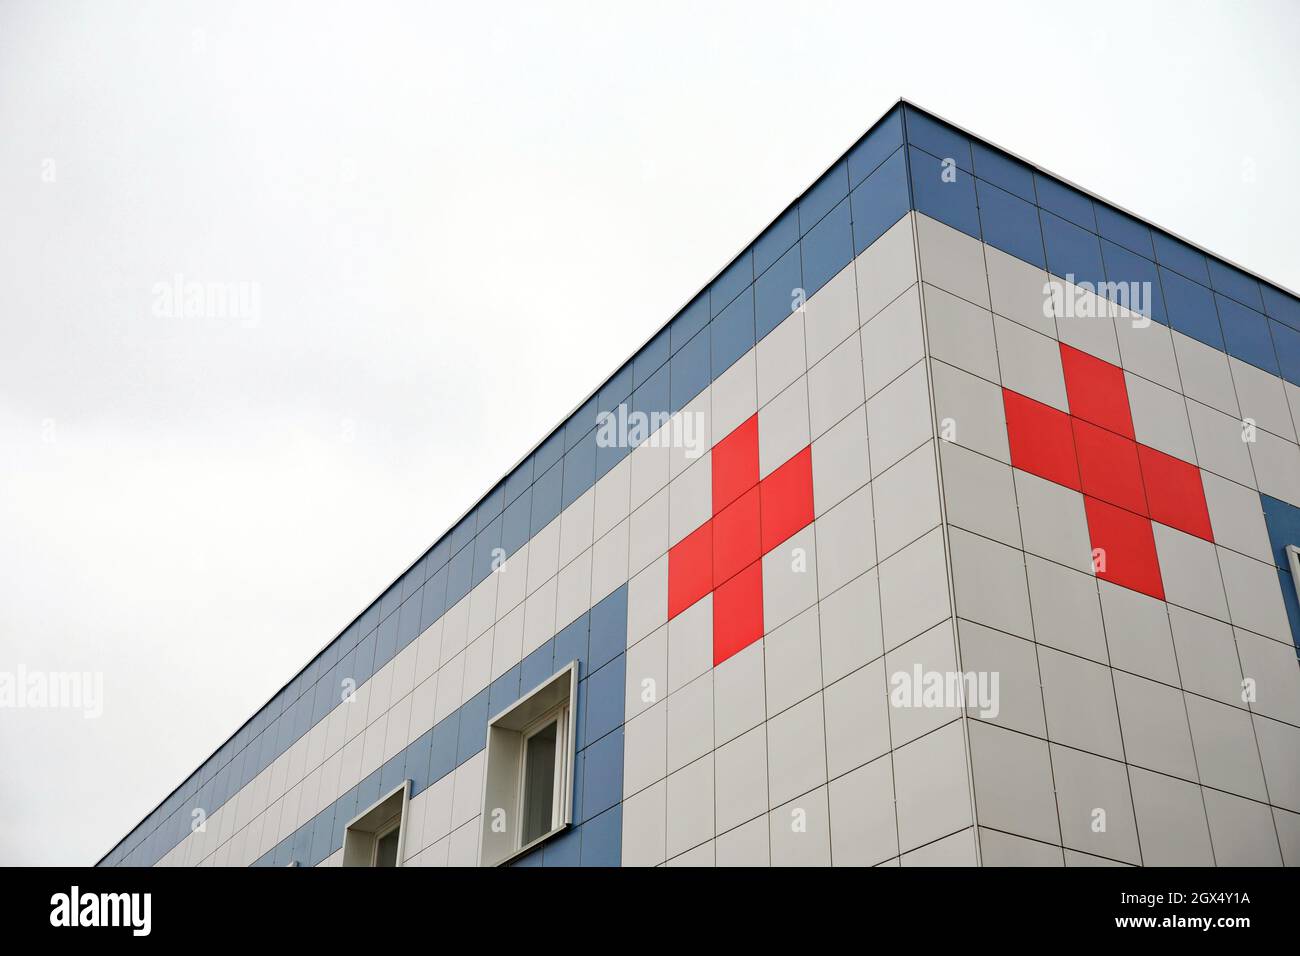 Celebrity momentum Traktor Medical symbol red cross on the cladding of the hospital building against  the background of the cloudy sky Stock Photo - Alamy